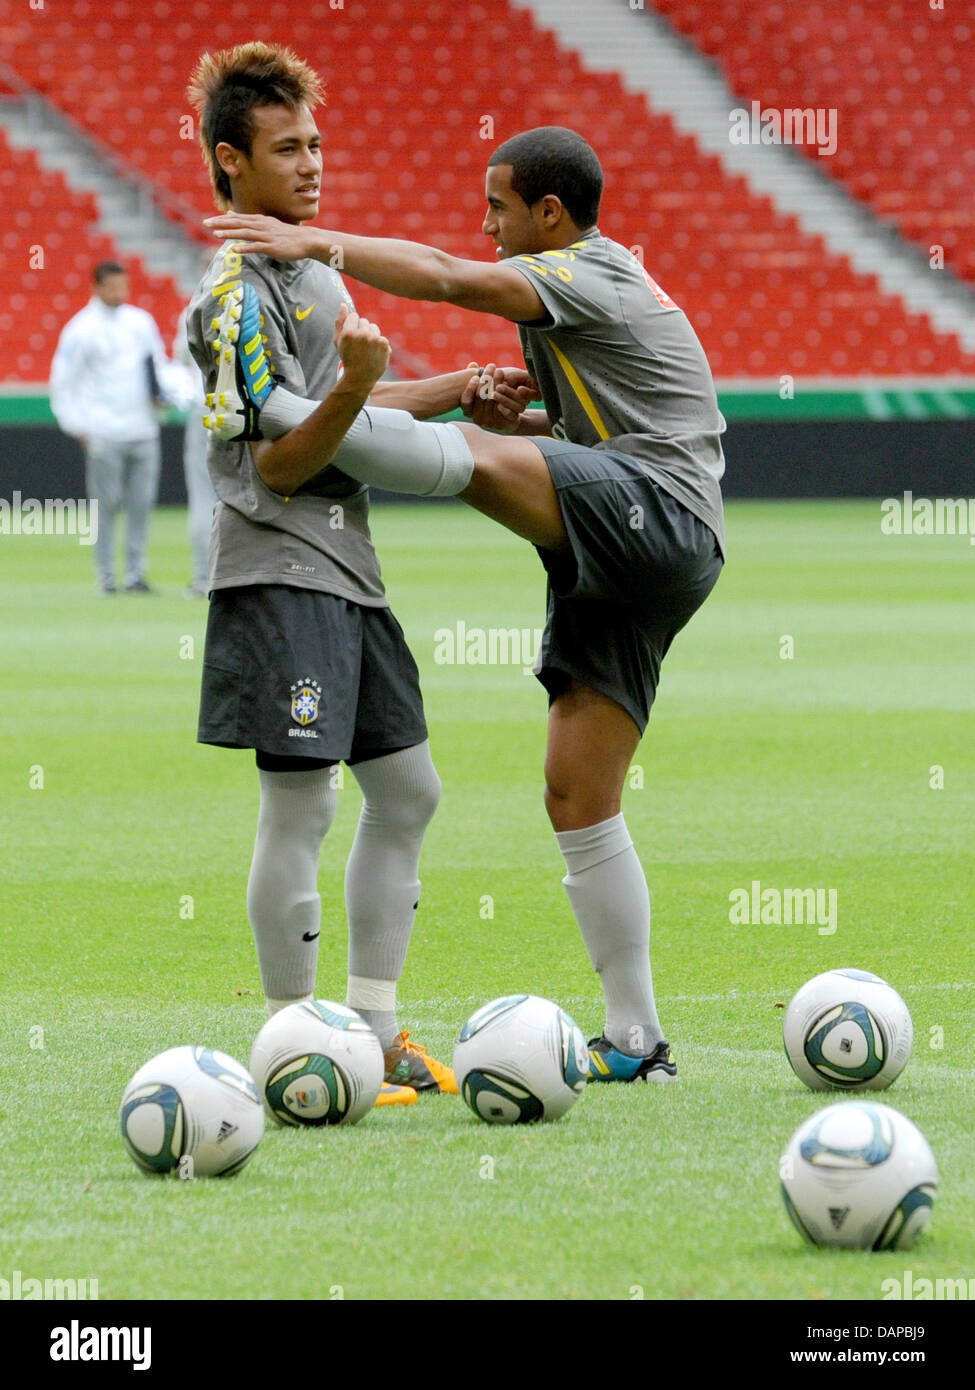 Neymar (l-r) und Lucas of the Brazilian national soccer team stretch during a training session in Stuttgart, Germany, 9 August 2011. Germany plays a friendly against Brazil on 10 August 2011. Photo: MARIJAN MURAT Stock Photo